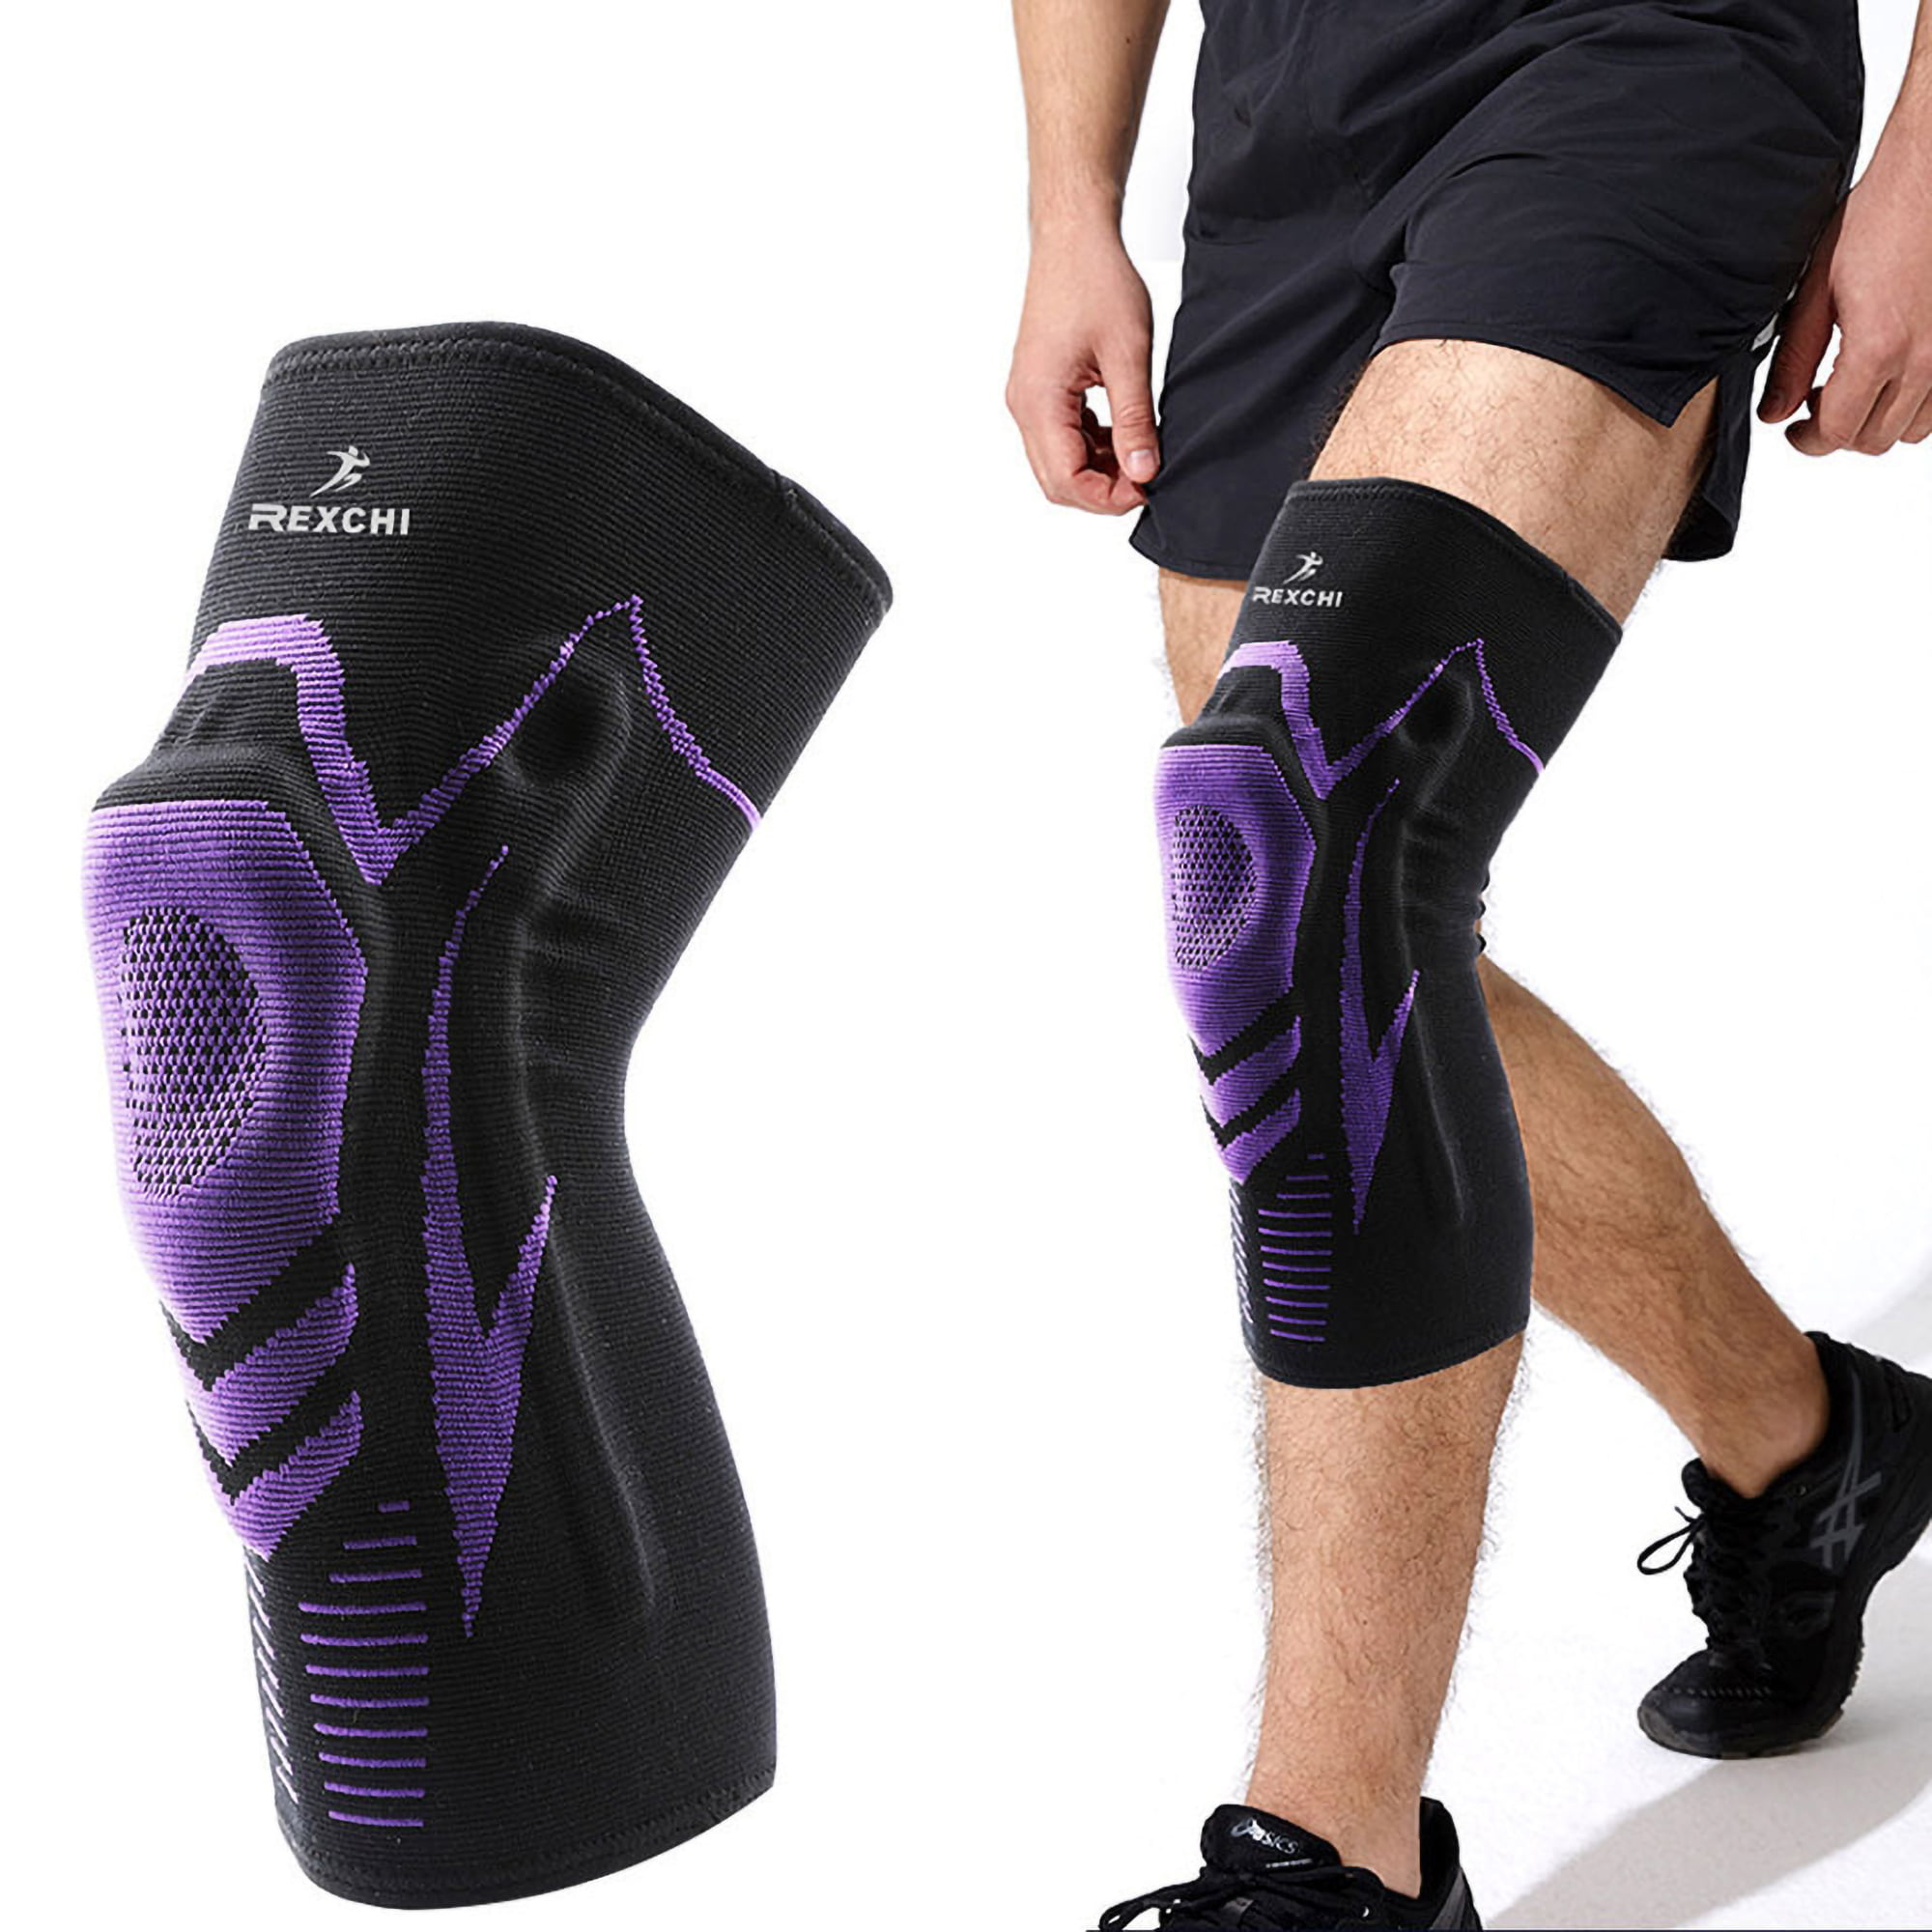 Gym Goods user Silicone Kneepad Leg Cover Best Knee Brace with Side Stabilizers Patella  Gel Pads for Knee Support Arthritis Meniscus Tear Joint Pain Relief Sports  injury - Walmart.com